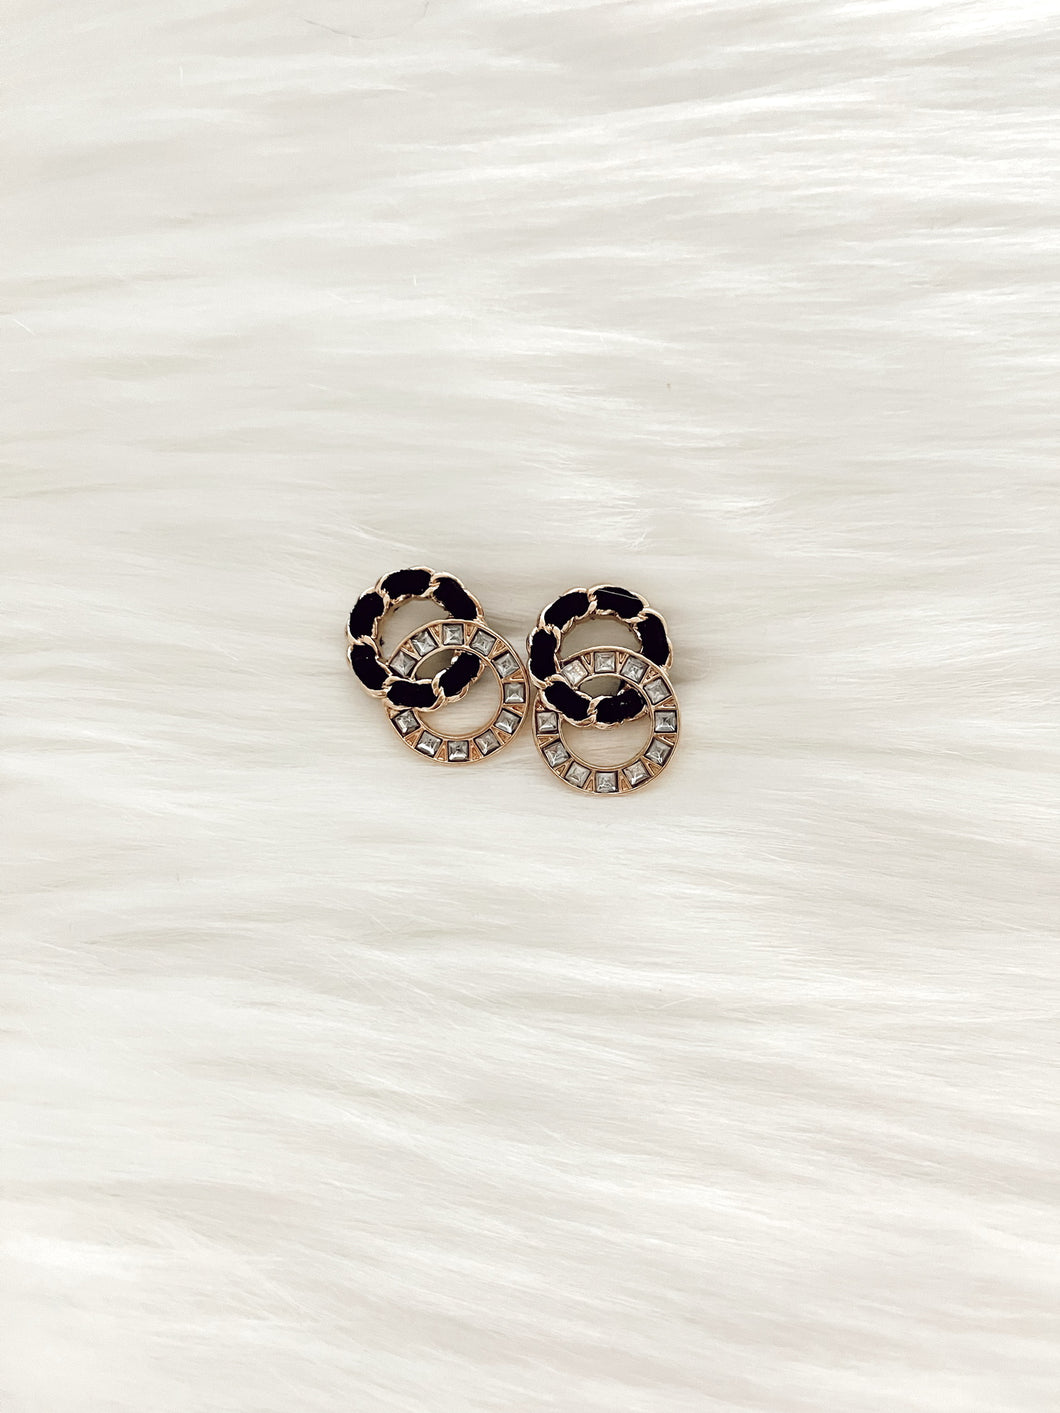 Opposites Attract Double Ring Stud Earrings